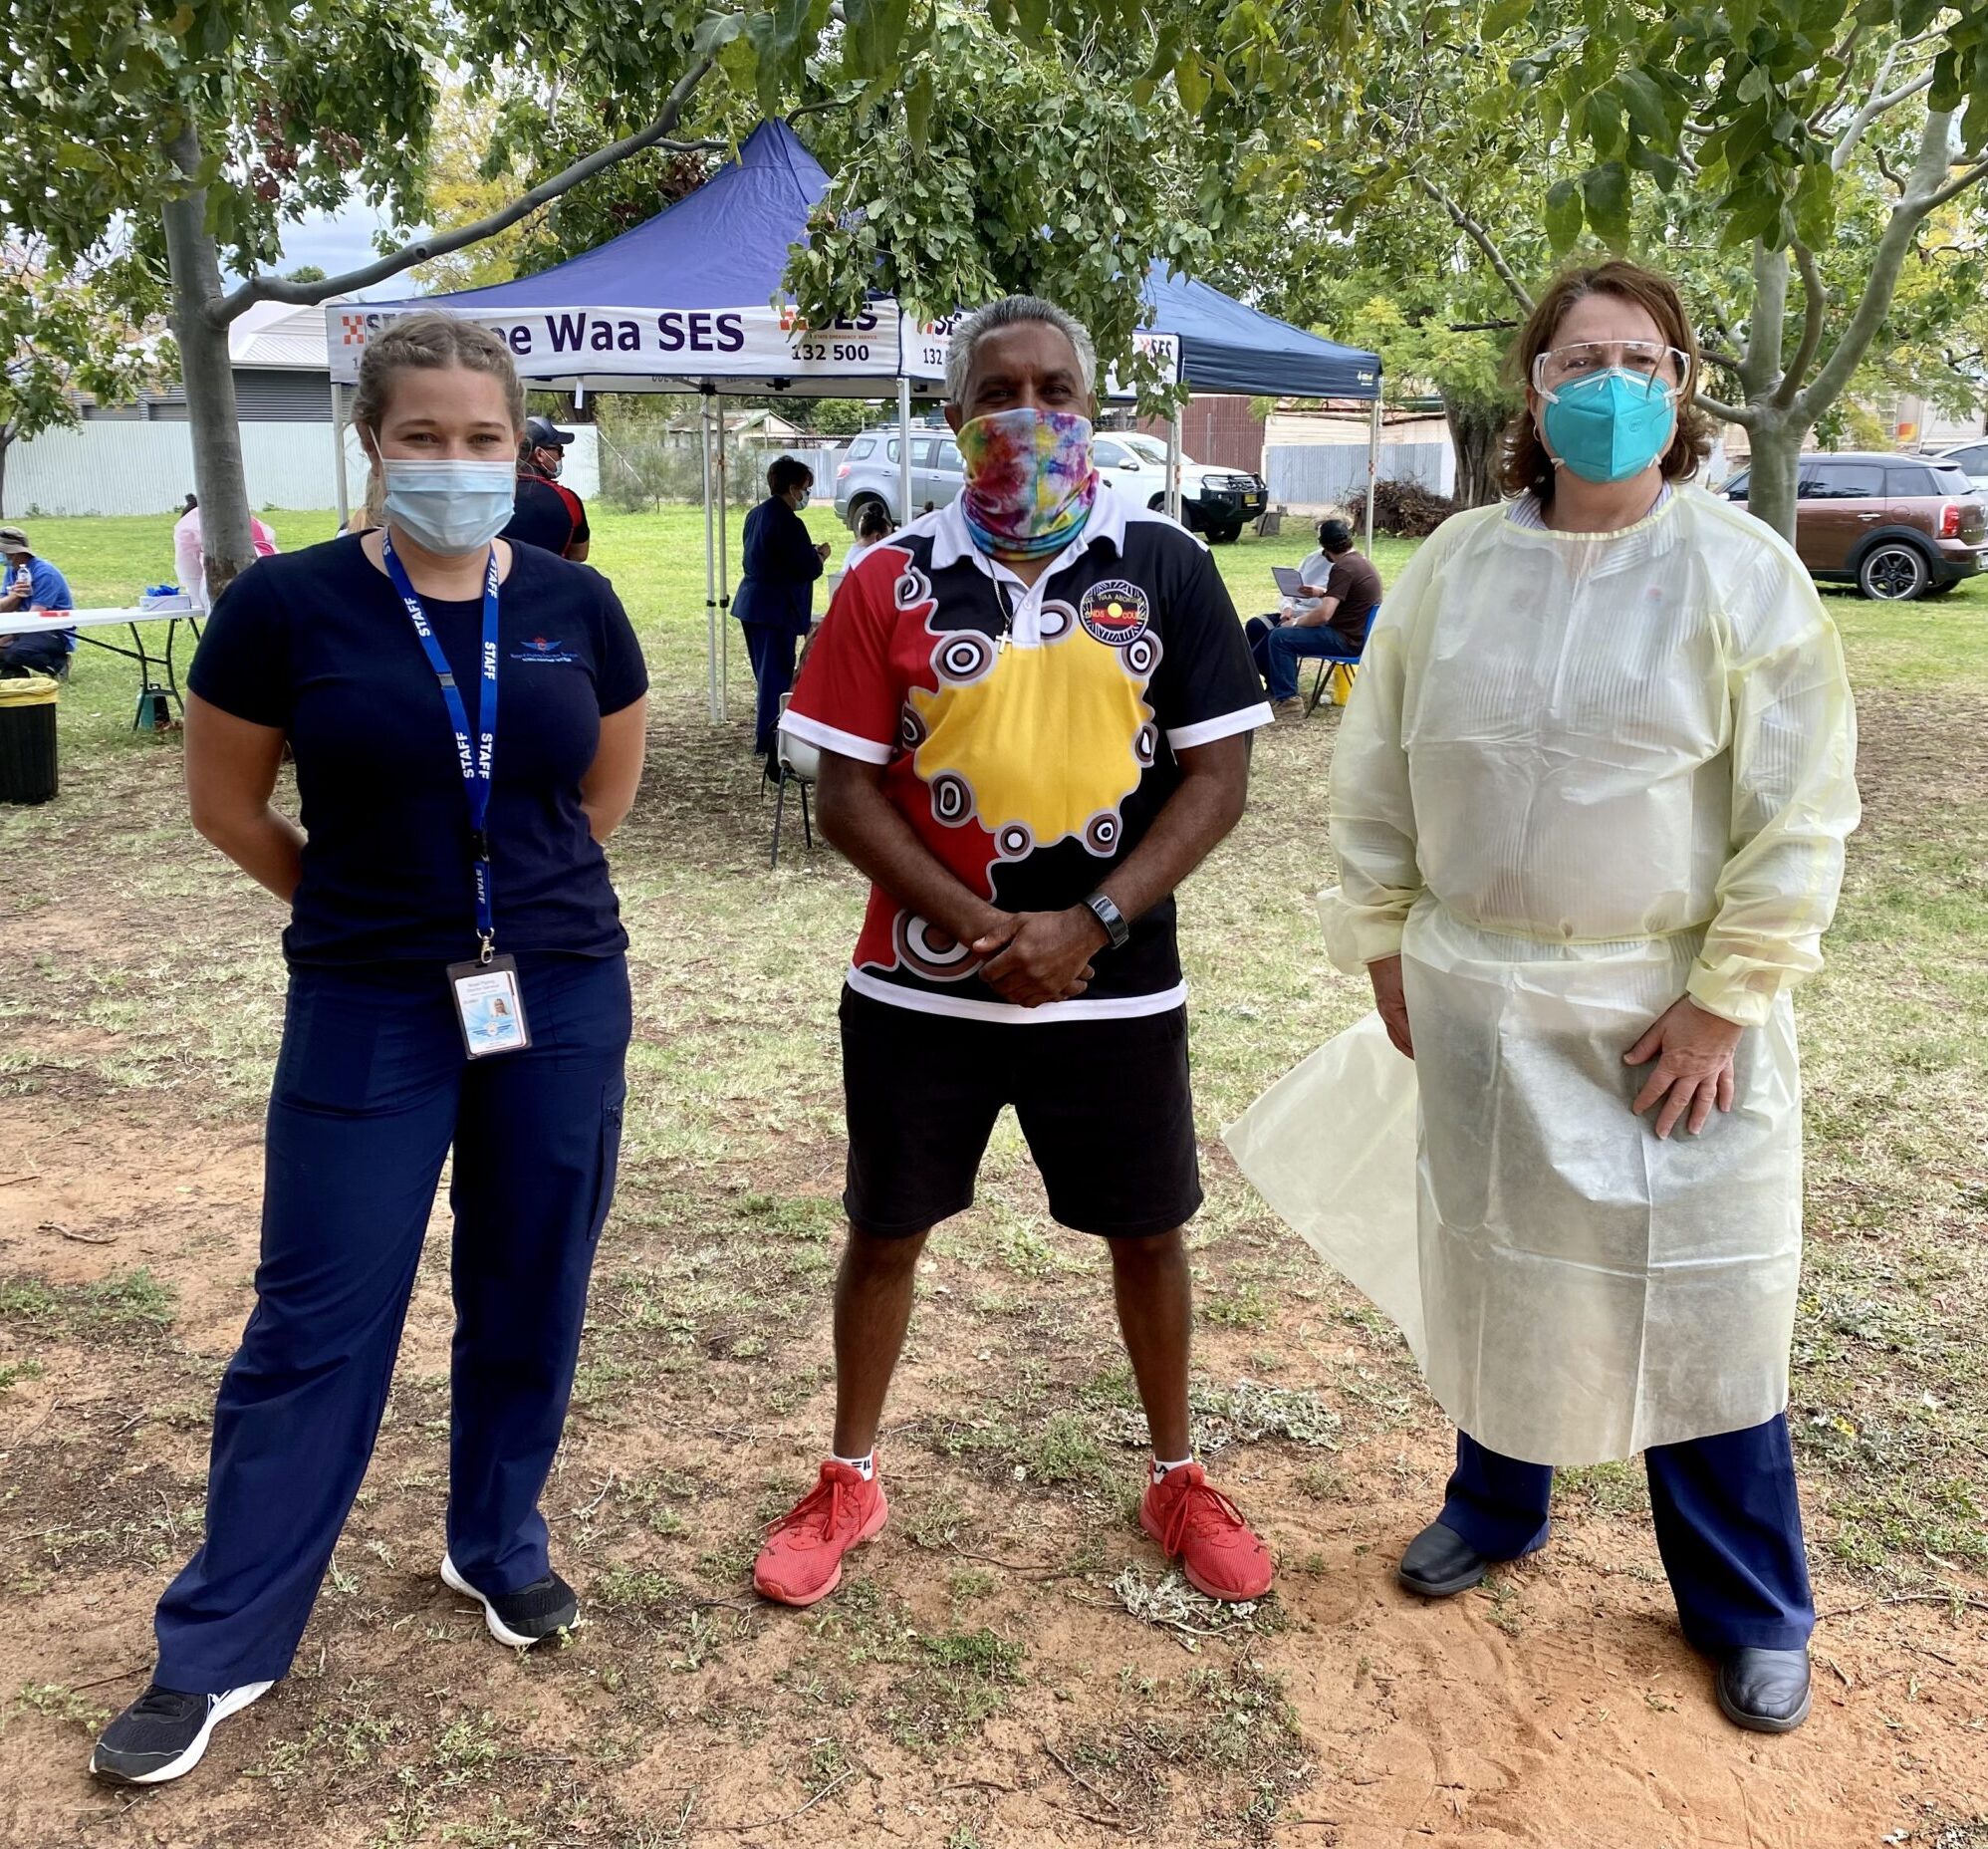 Royal Flying Doctor Service lead nurse Alice Sack, Wee Waa Local Aboriginal Land Council chair Clifford Toomey and Wee Waa Community Hospital’s health service manager and nurse Maxine Ambrose at Saturday’s pop-up COVID vaccination clinic, where more than 300 vaccines were administered.